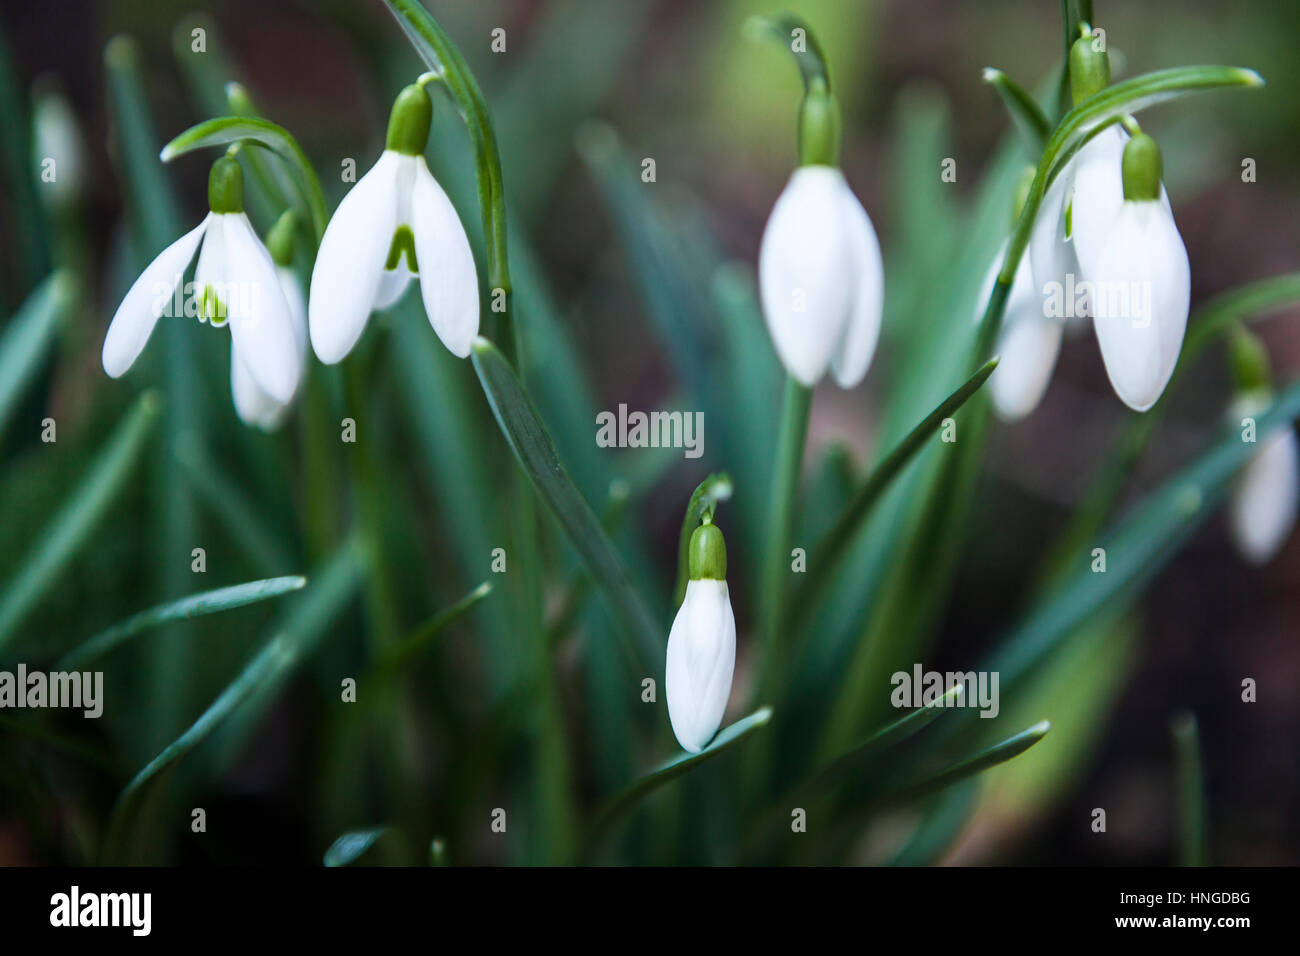 Close up of cluster of Snowdrops (Galanthus nivalis) in garden Stock Photo